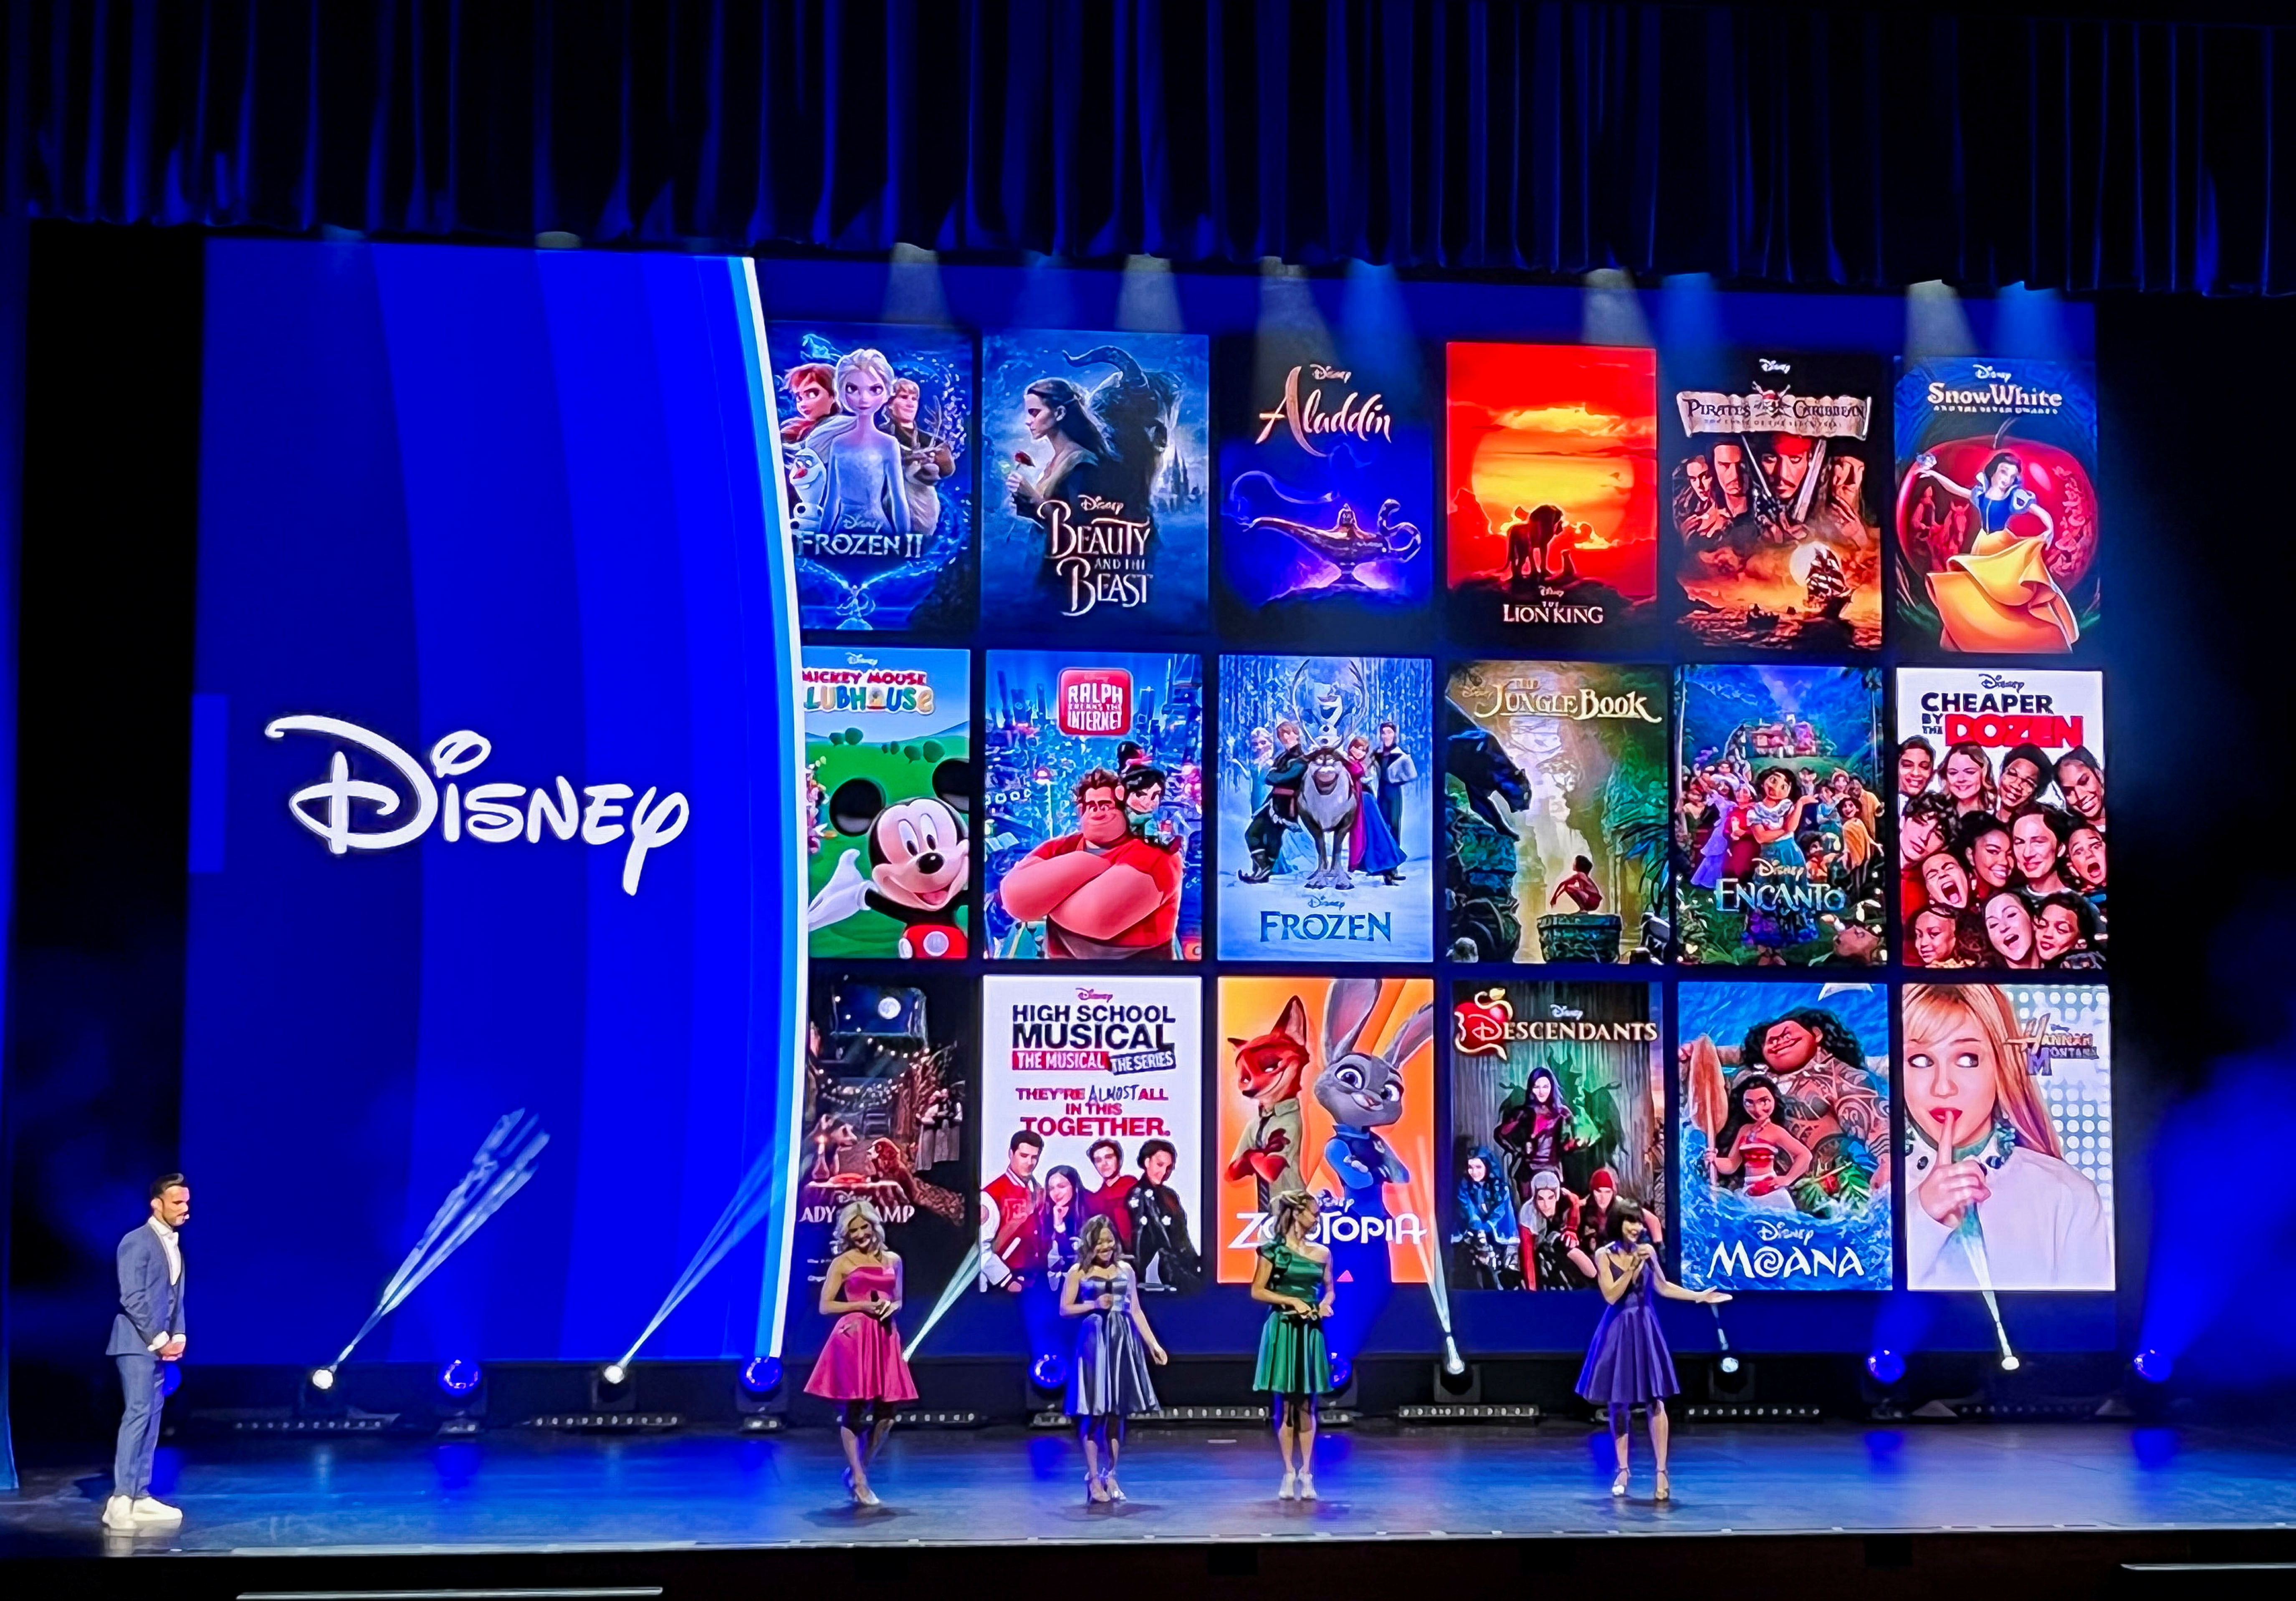 Tamim Fares, regional Director of Disney+, speaks at a press event ahead of launching a streaming service in the Middle East and North Africa, at Dubai Opera in Dubai, United Arab Emirates, June 7, 2022.